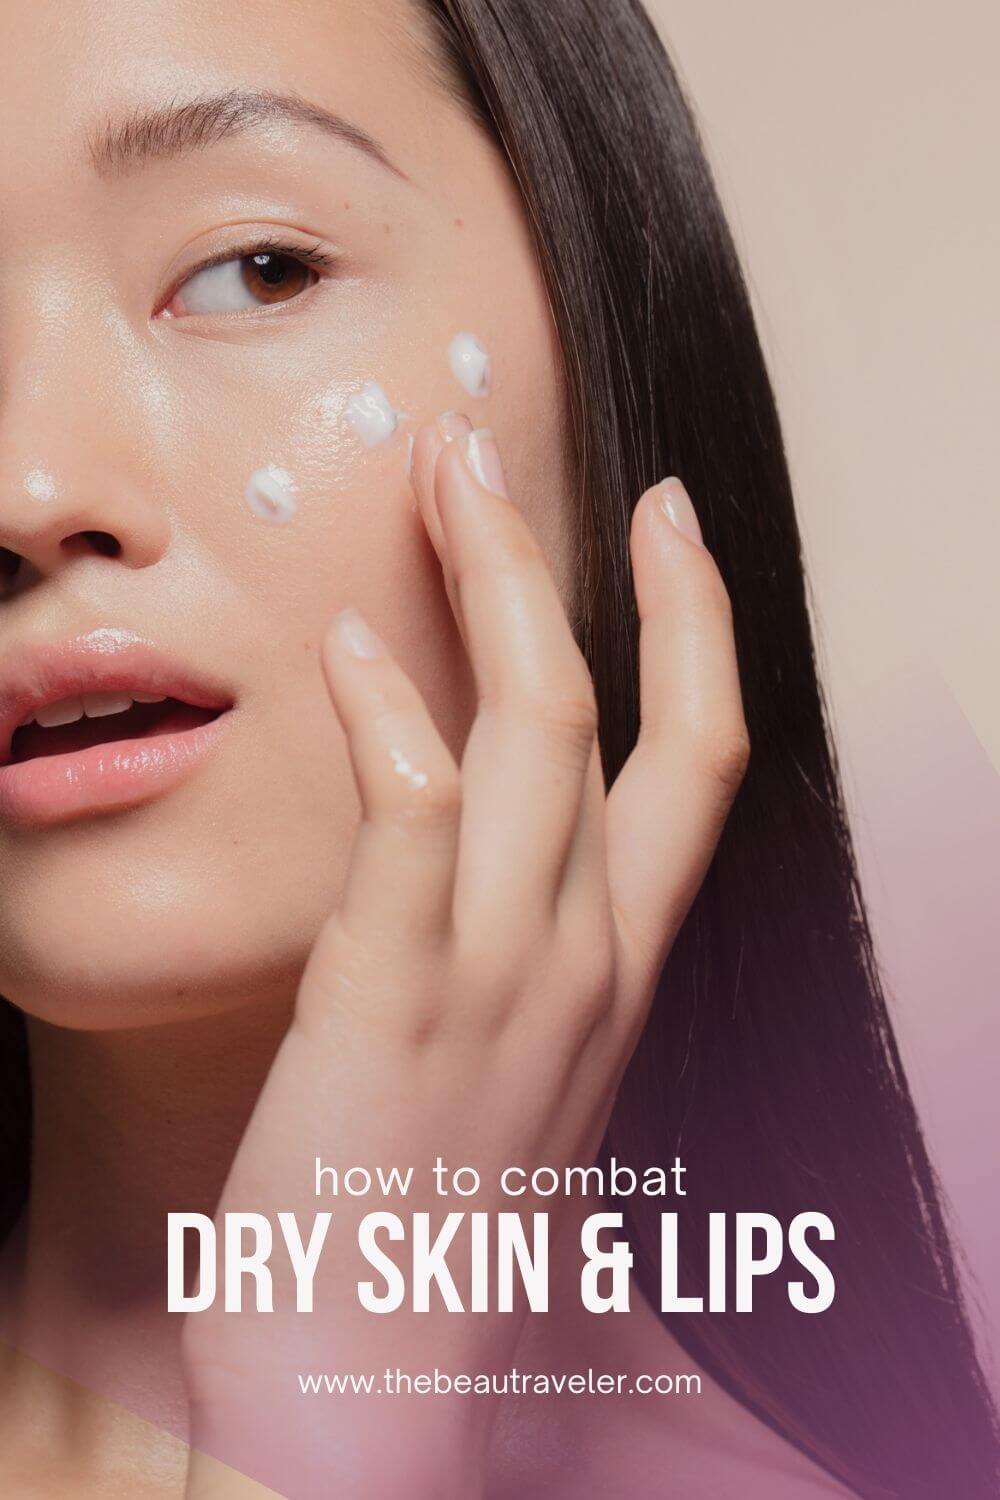 How to Combat Dry Lips, Hair, and Skin - The BeauTraveler